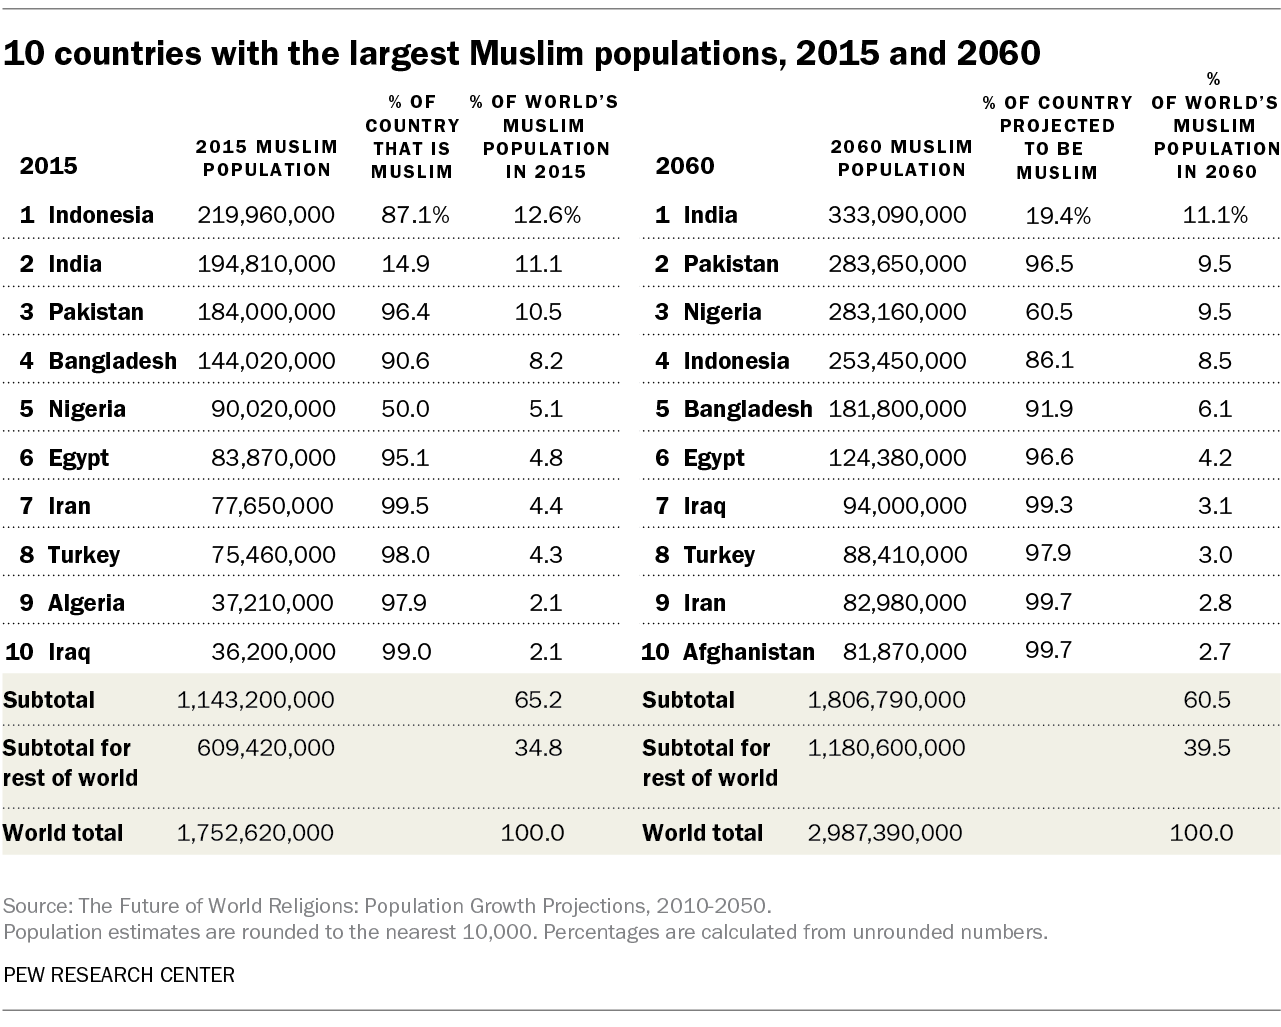 Which countries have the 10 largest Christian and Muslim populations